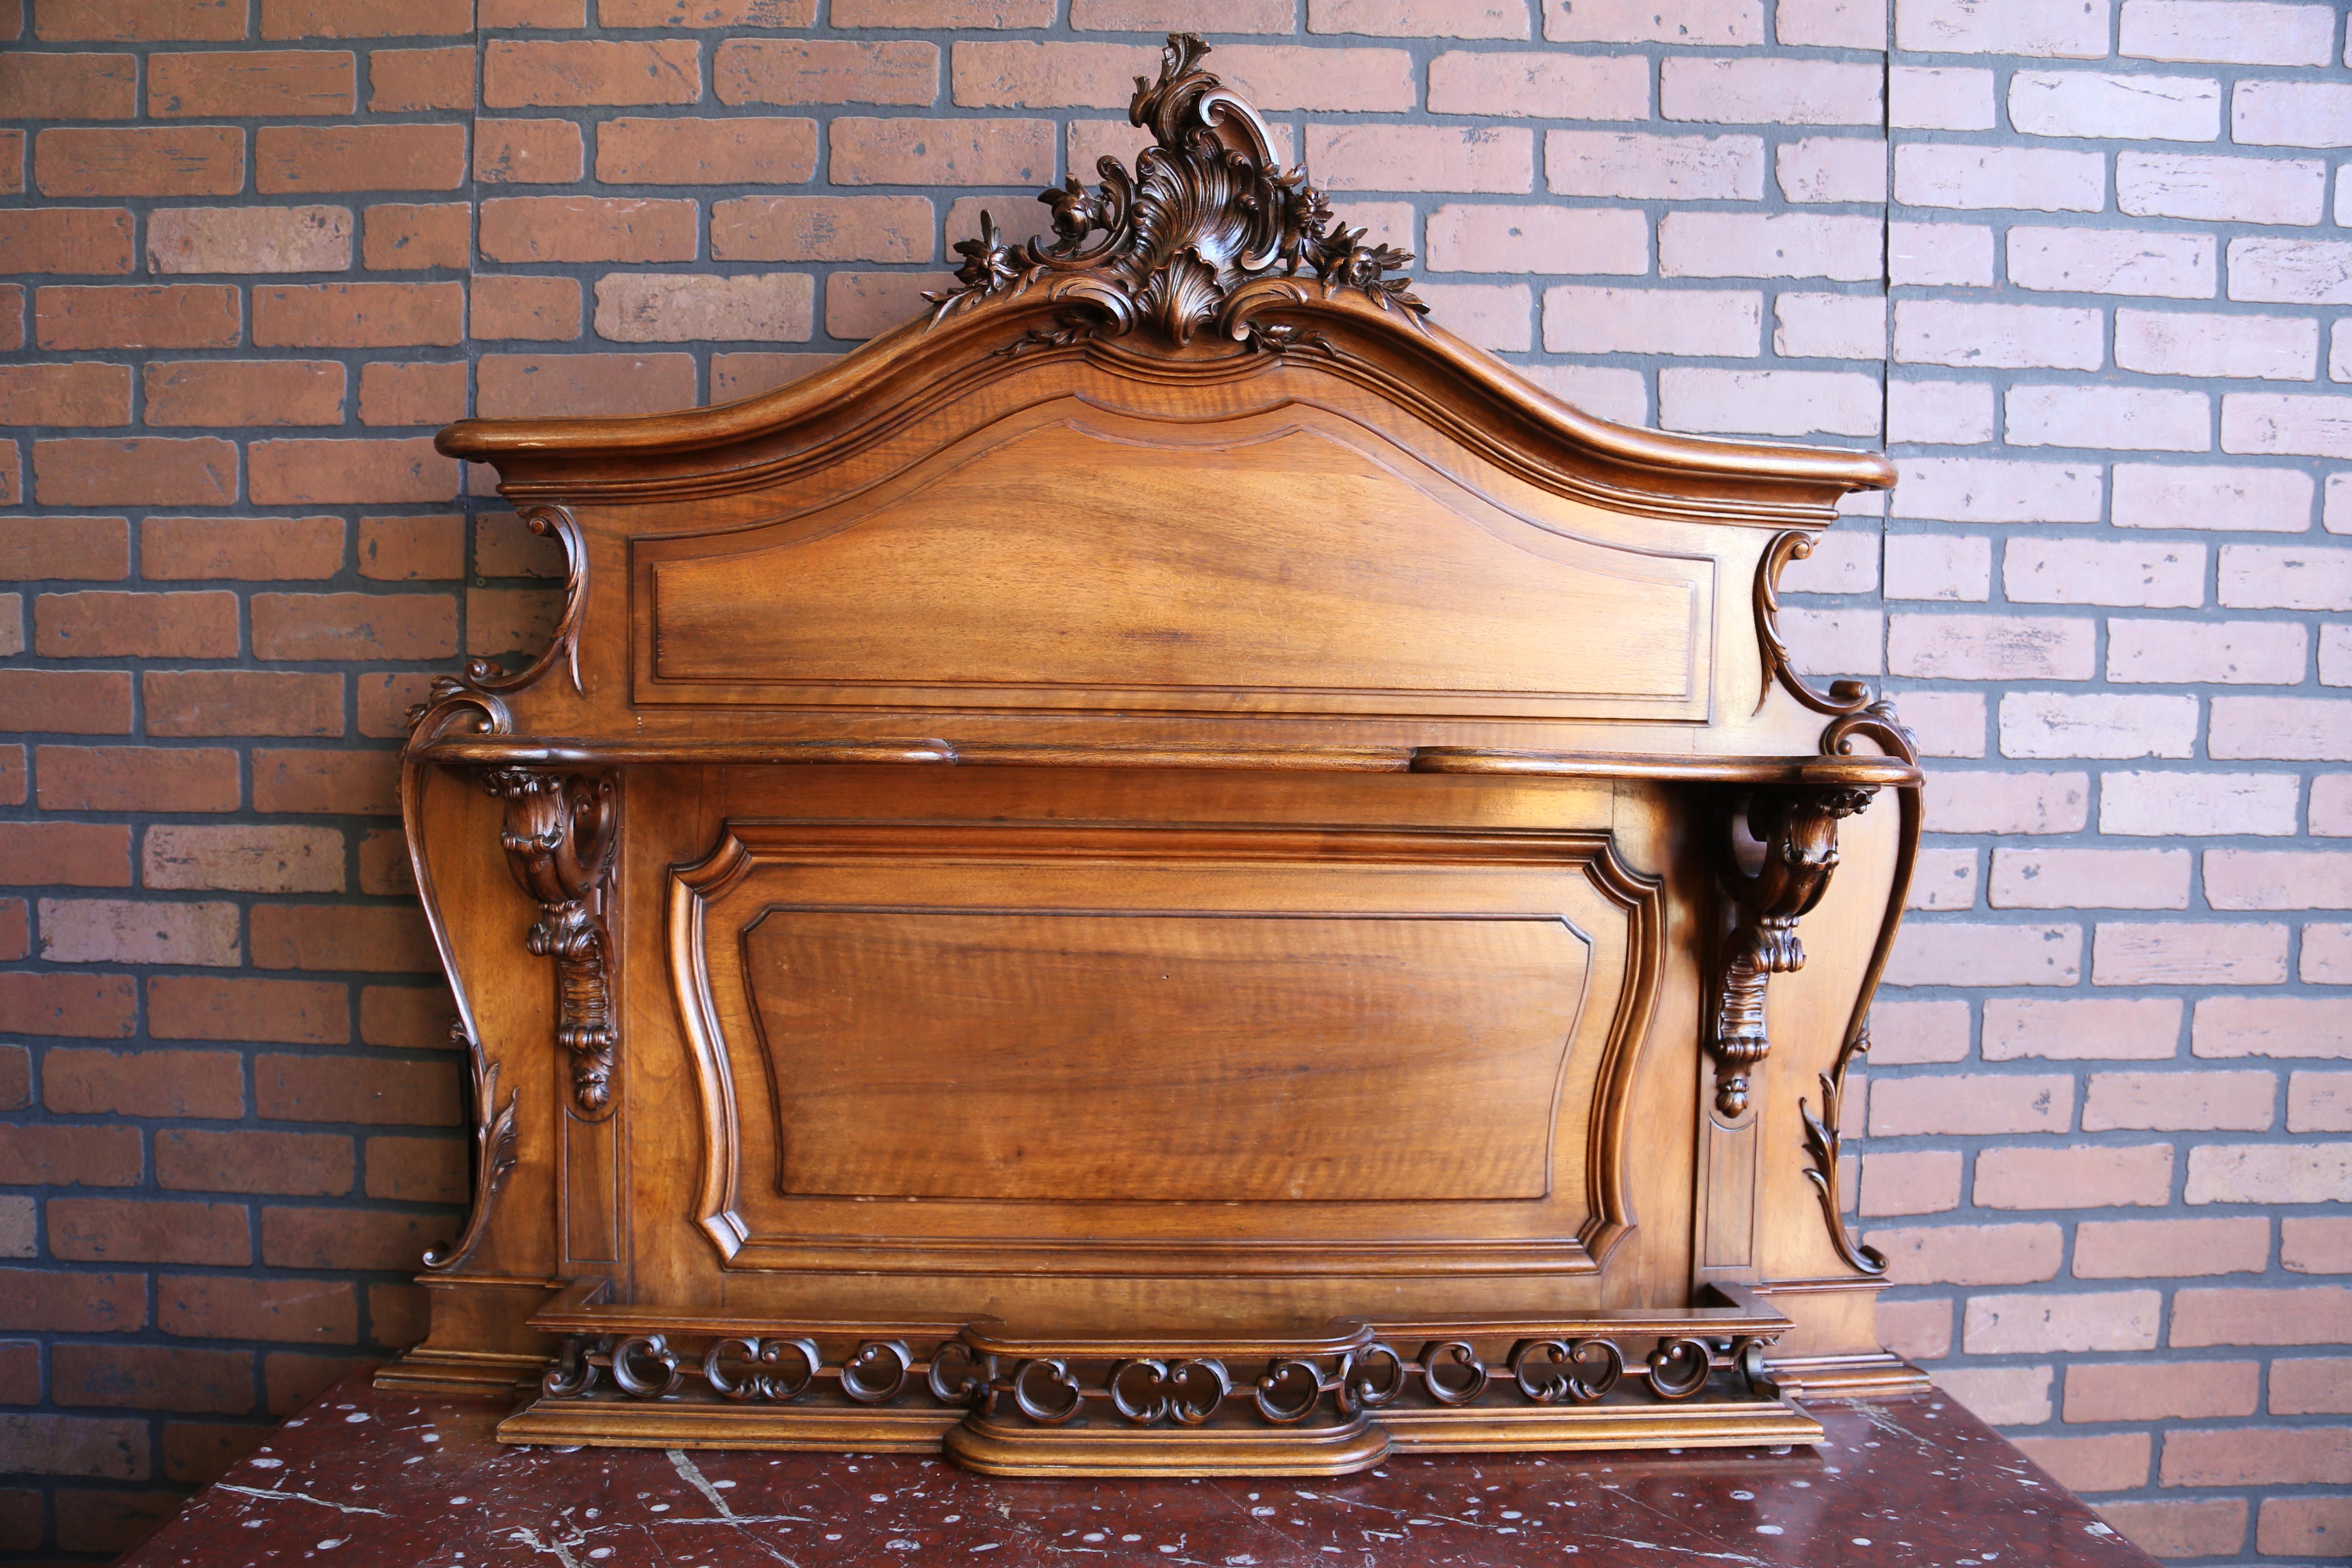 Splendid French marble top Vaisselier. Adorned with magnificent carvings from the sweet flowers on the raised door panels, to the center details of the scalloped aprons, again at the upper corners of the base and top of the cabriole legs, and of